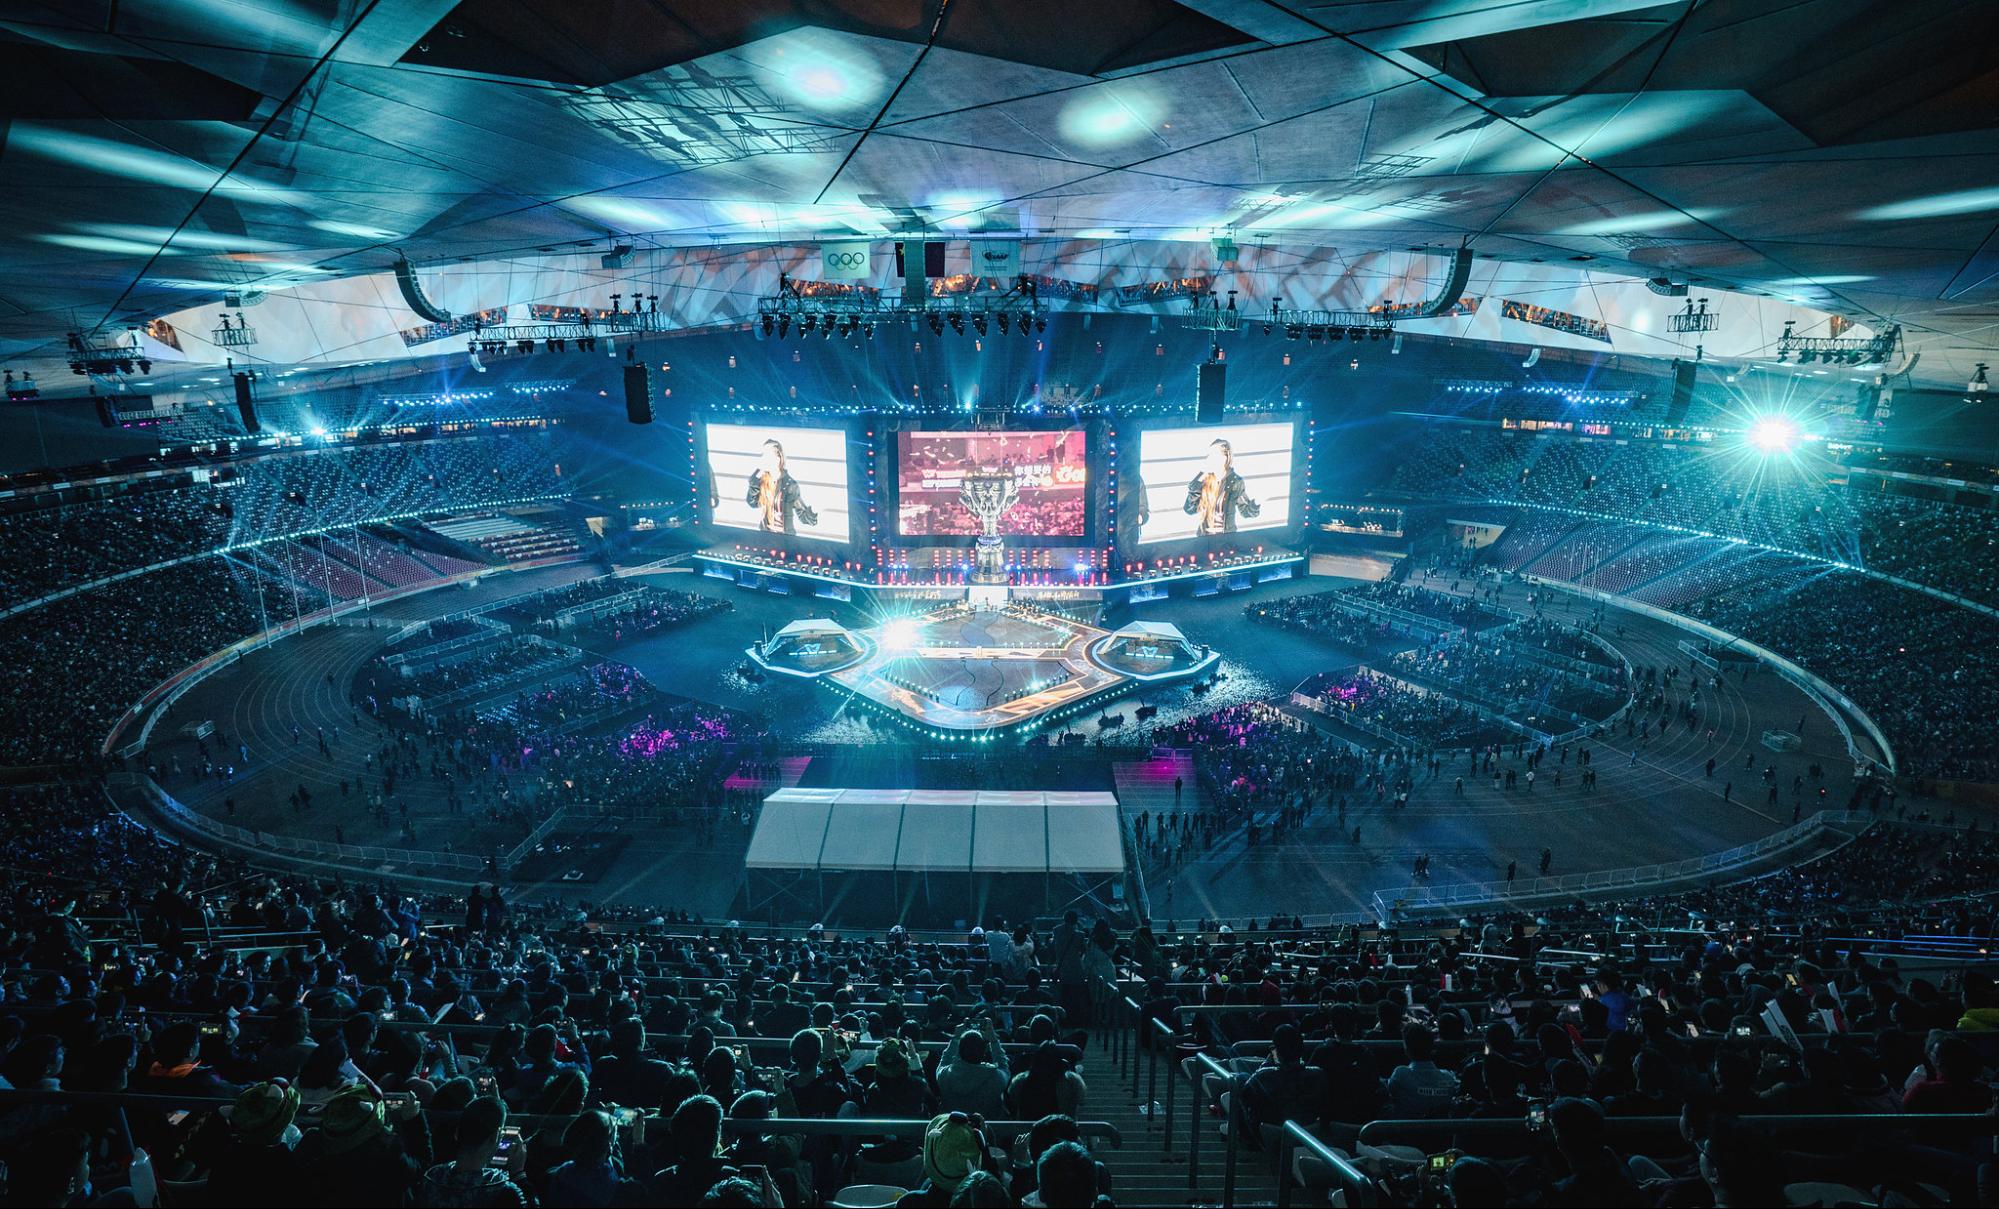 Engineering Esports: The Tech That Powers Worlds